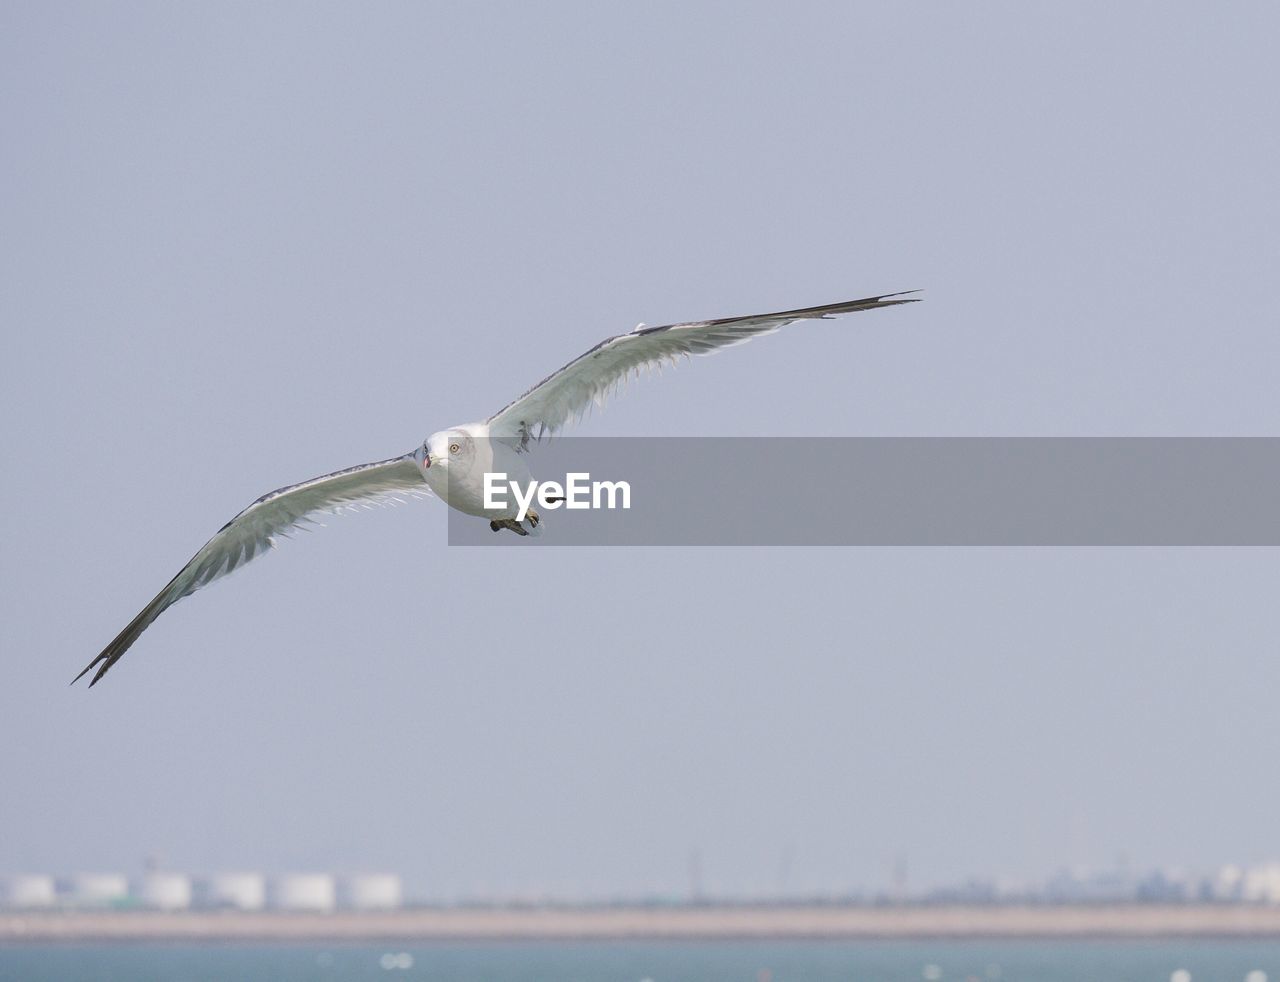 CLOSE-UP OF SEAGULL FLYING AGAINST CLEAR SKY